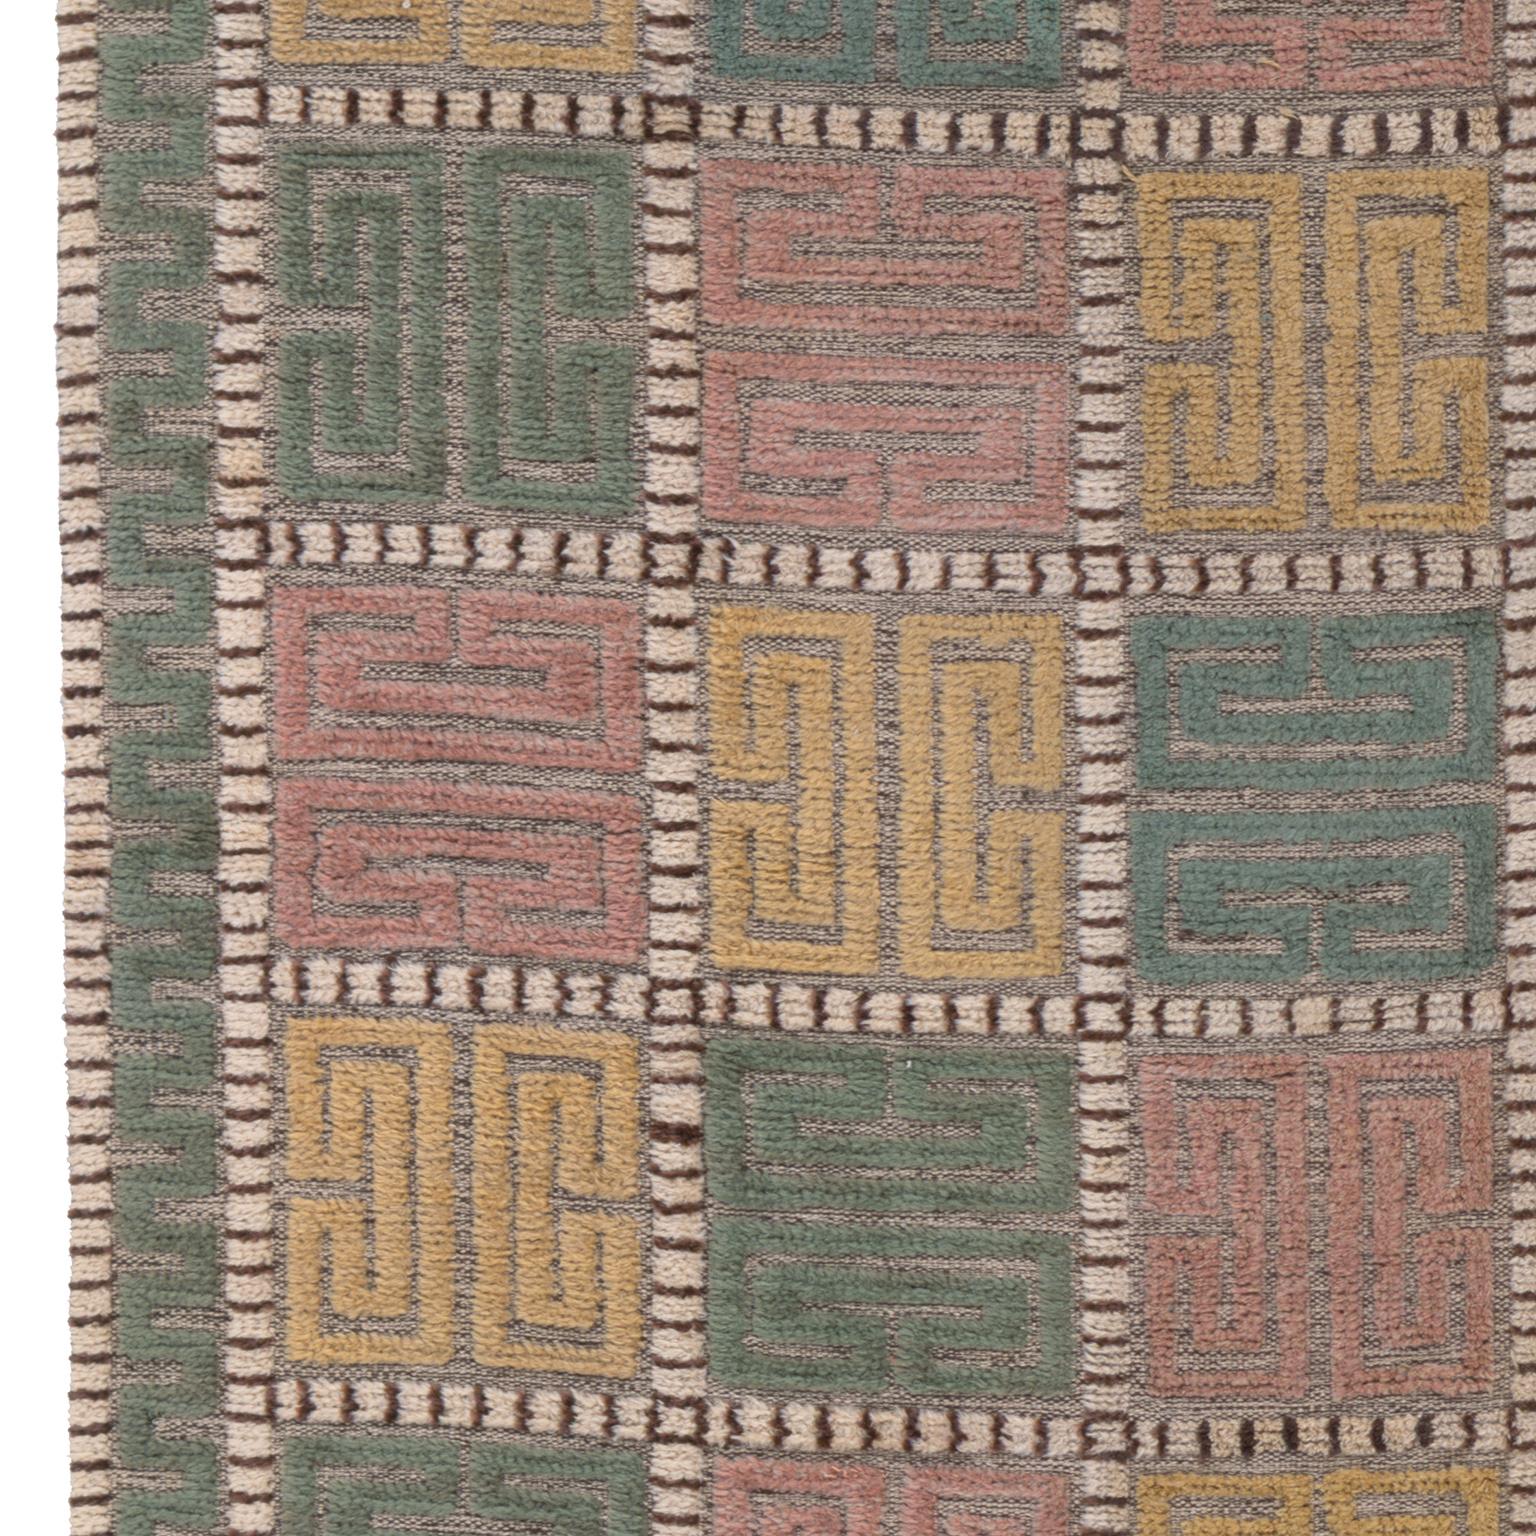 Mid-20th Century Swedish Pile Rug by AB Märta Måås-Fjetterström In Good Condition For Sale In New York, NY